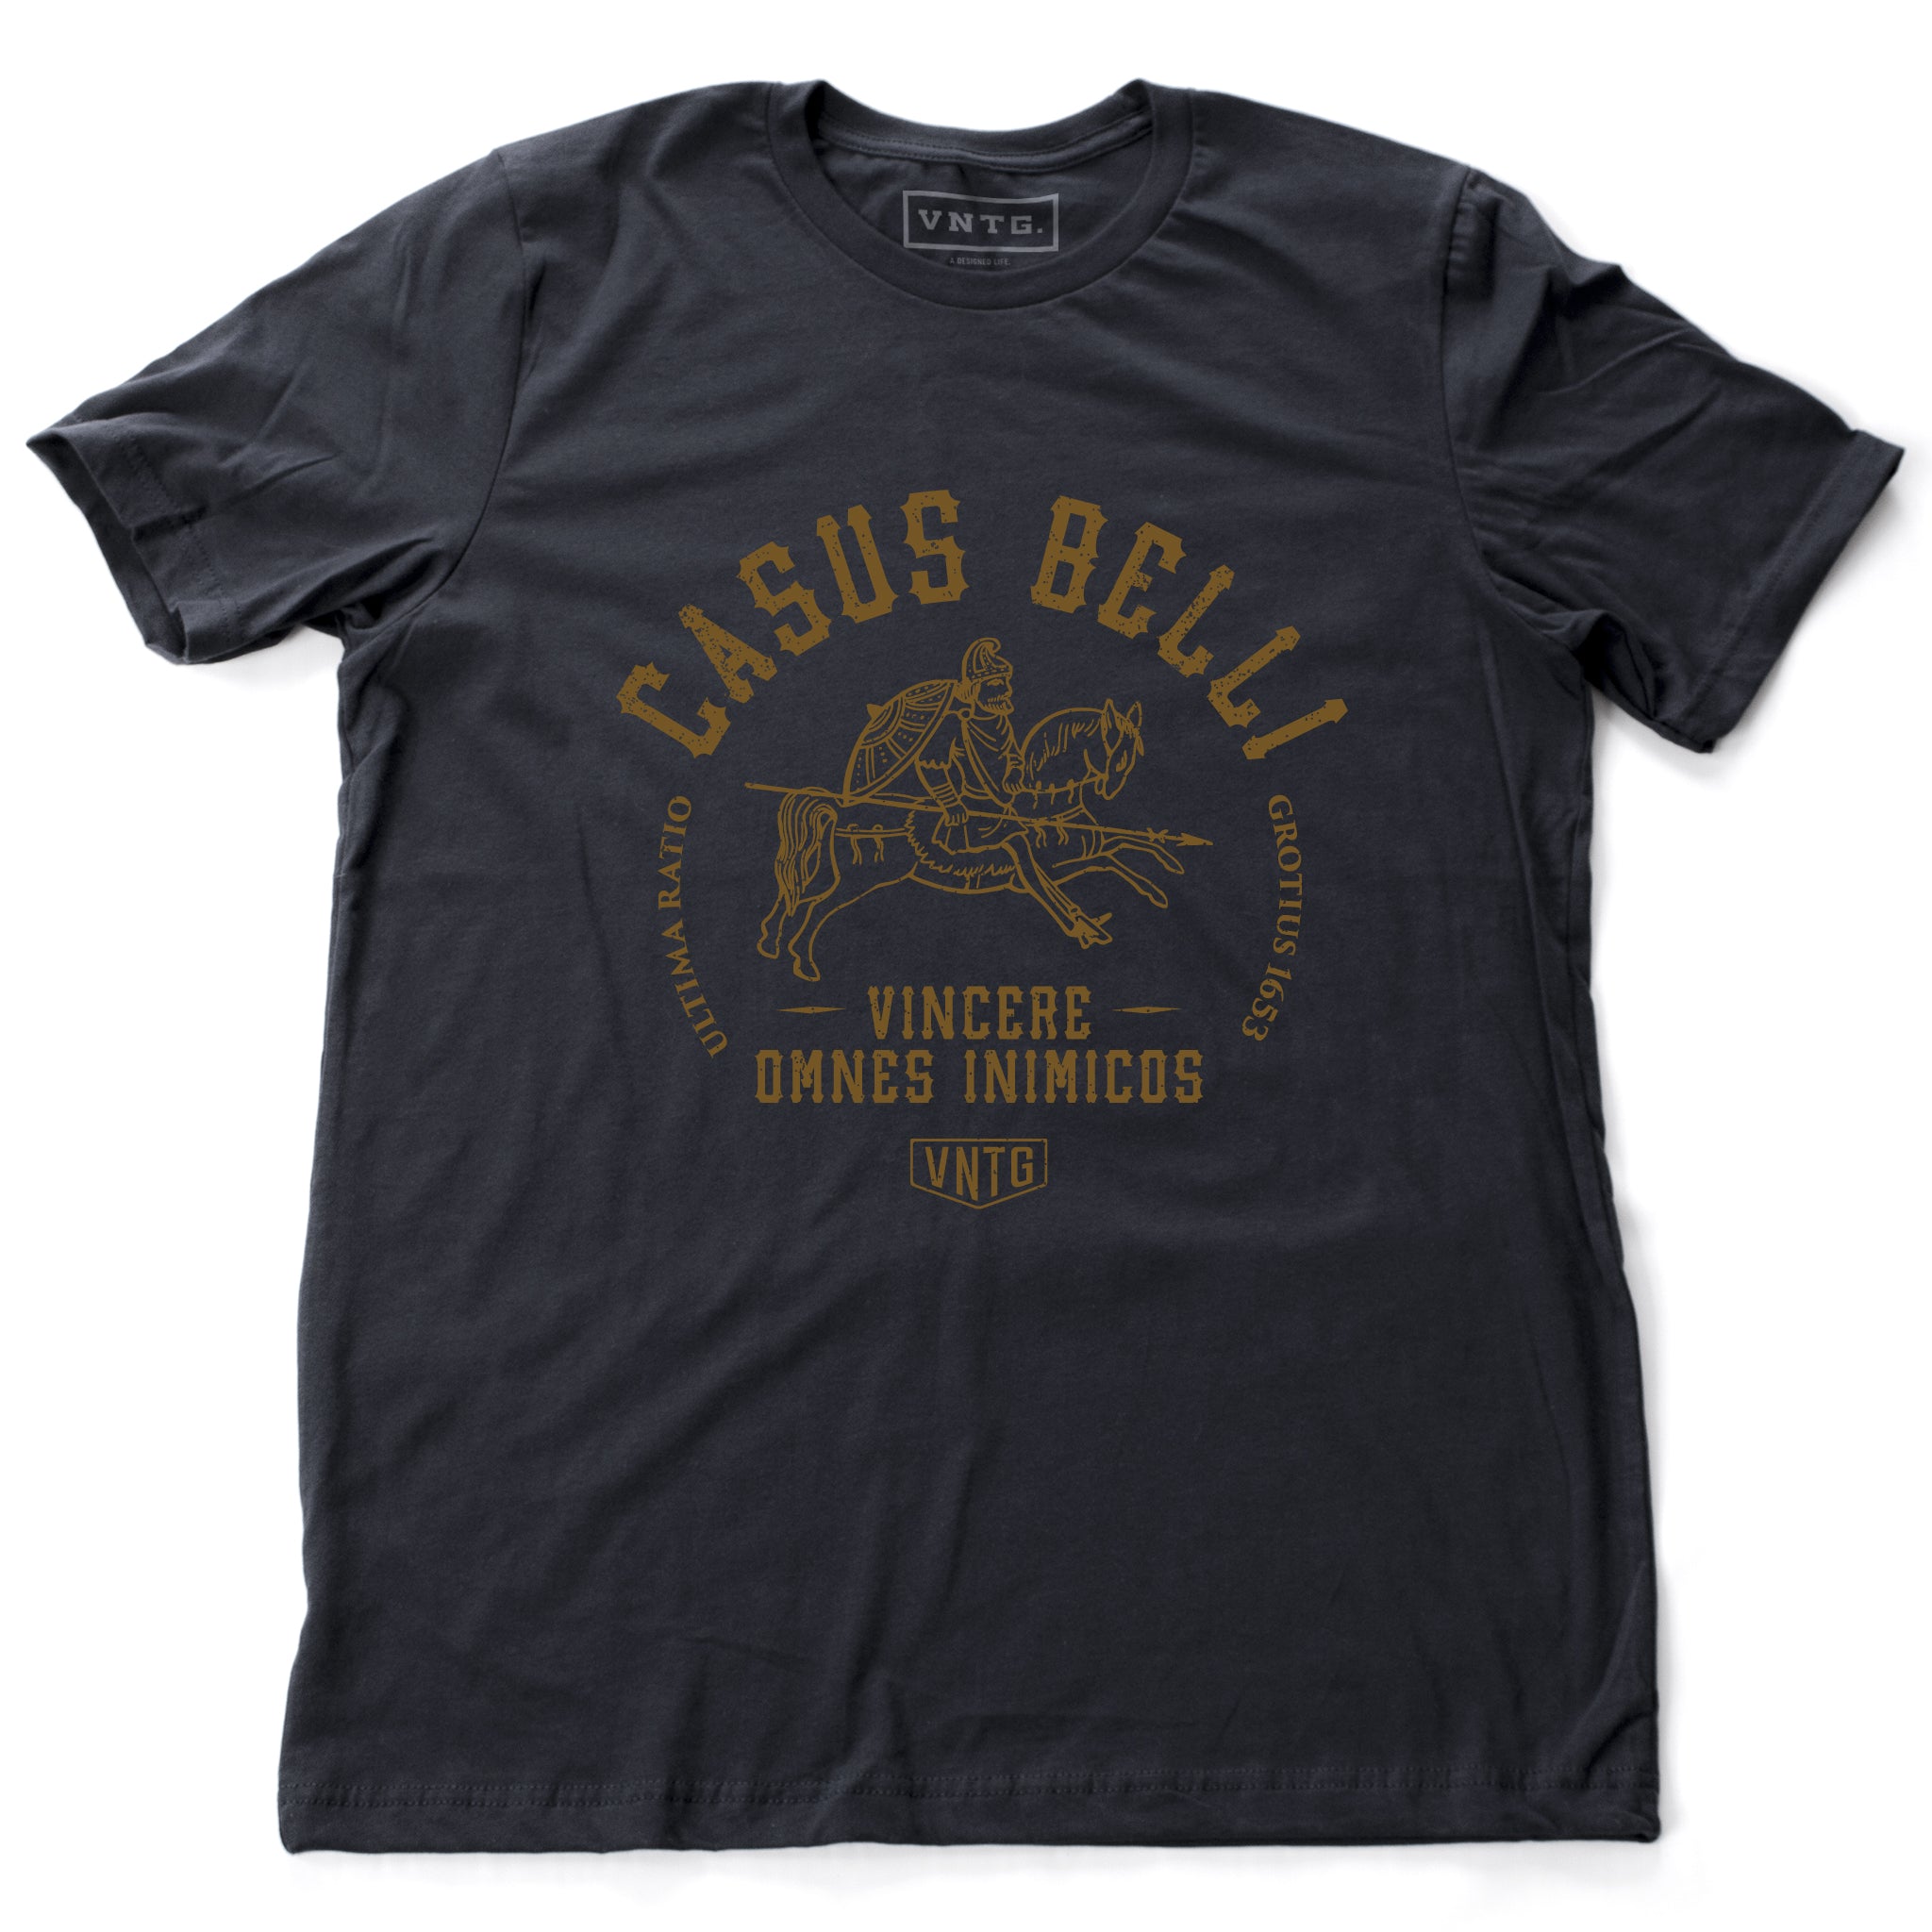 This classic, navy blue vintage-inspired retro t-shirt was inspired by an episode of Seinfeld. It features a beautiful historical military figure on horseback, referring to a Latin phrase “conquer all enemies” – by the brand VNTG, for wolfsaint.net